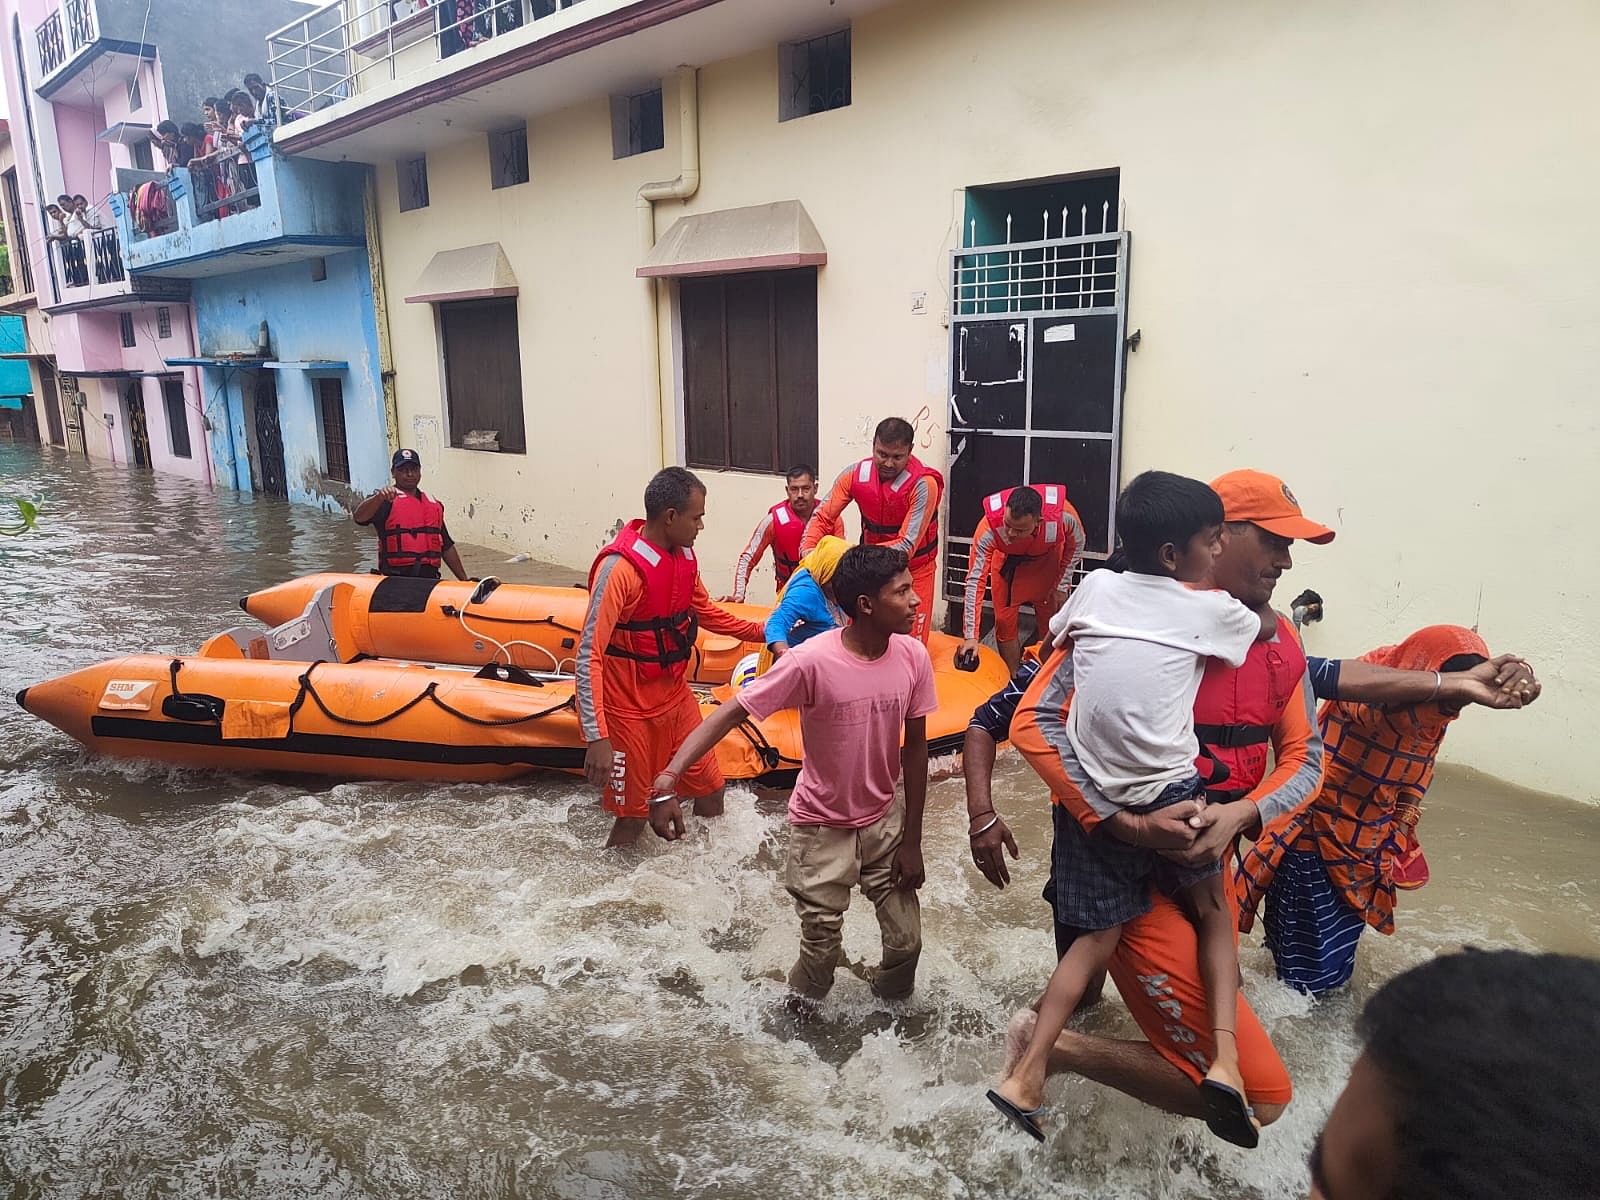 NDRF teams assisting citizens during floods in Uttarakhand. Credit: Reuters Photo